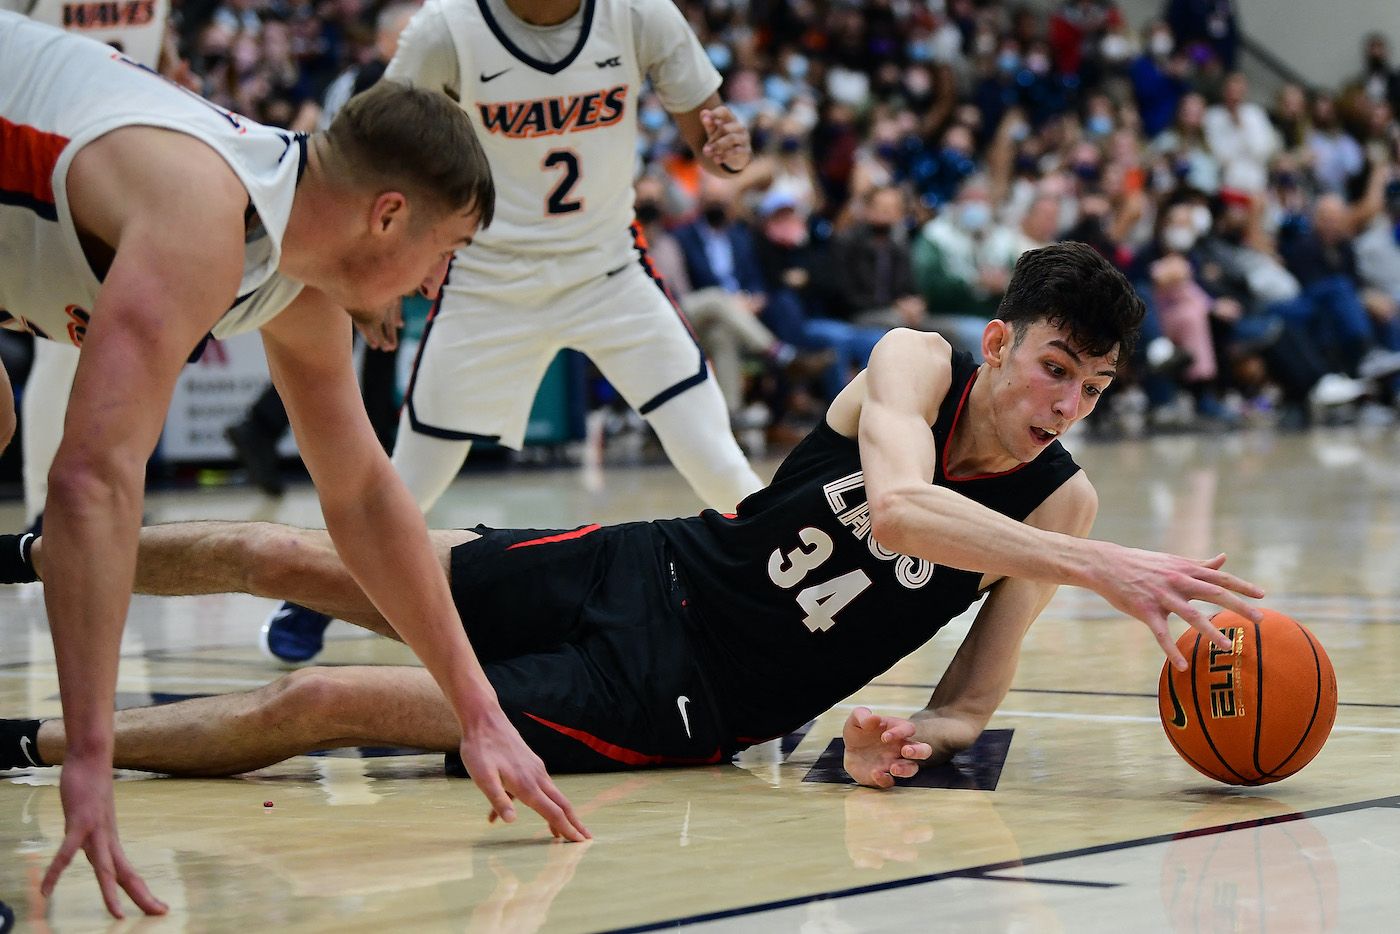 Chet Holmgren (34 - pictured playing centre for Gonzaga Bulldogs), who is now dealing with a Lisfranc injury, plays for the ball against Pepperdine Waves forward Jan Zidek (31) during the second half at Firestone Fieldhouse  on Feb 16.